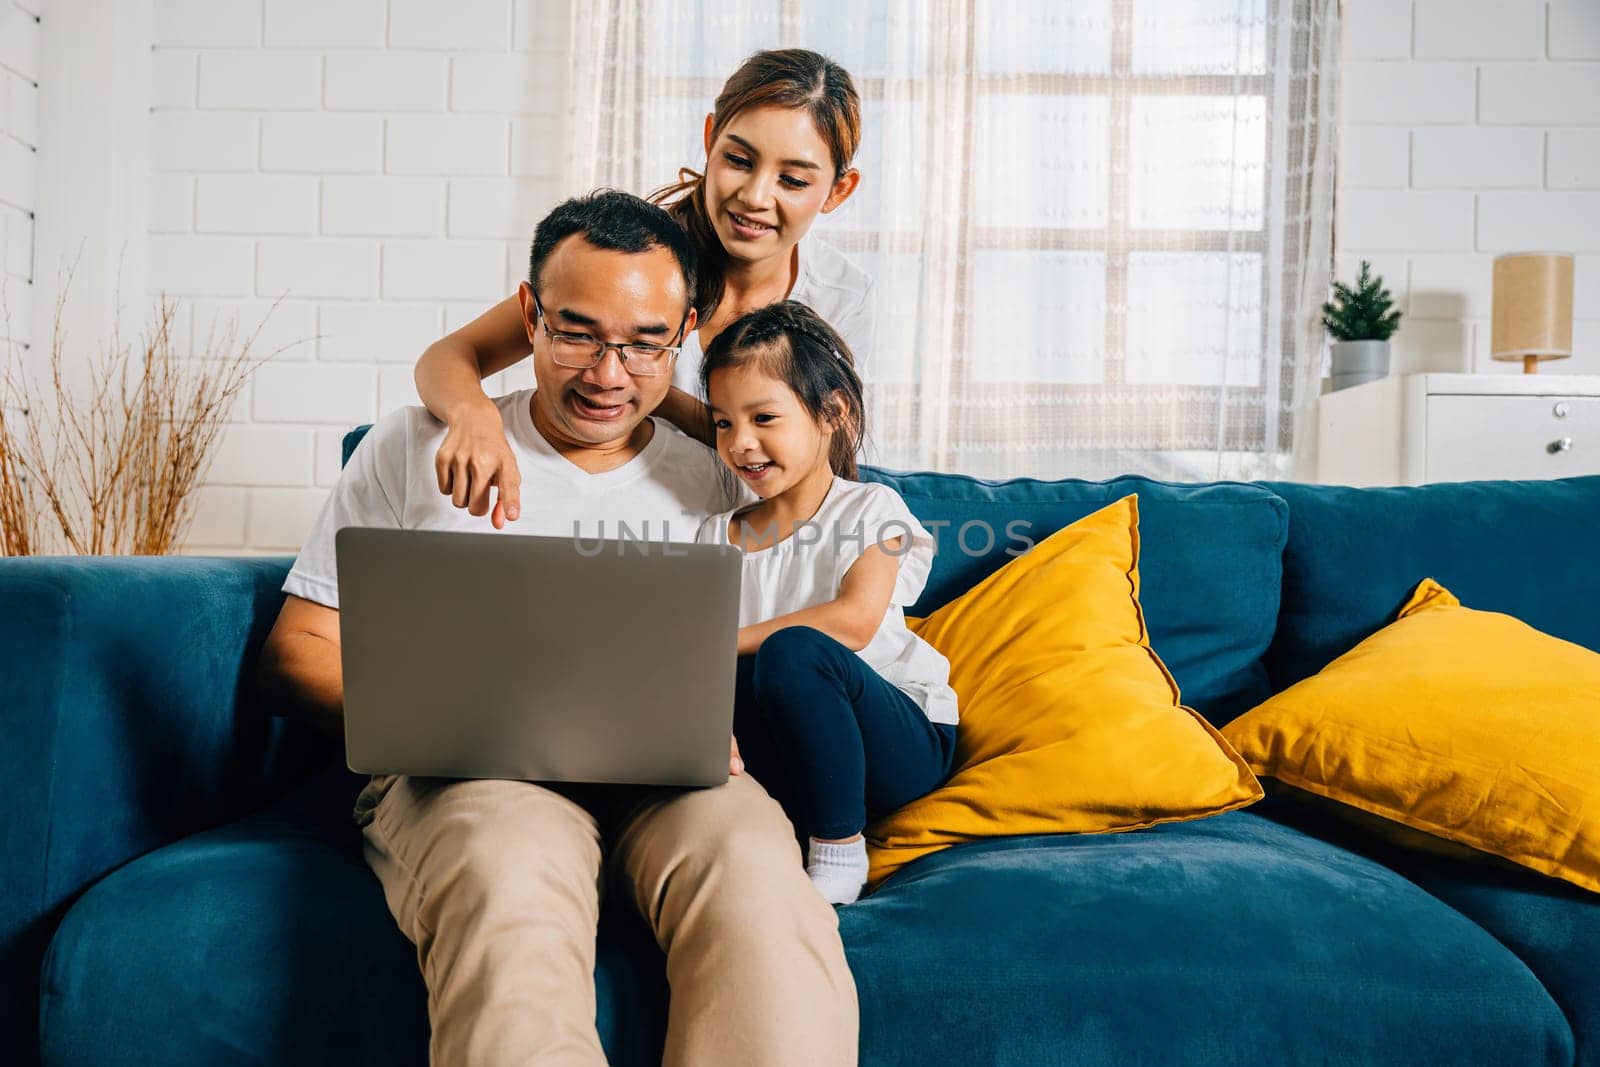 A family's quality time at home as parents and kids sit on the couch with a laptop. This modern bonding experience brings smiles joy and togetherness to their lives.